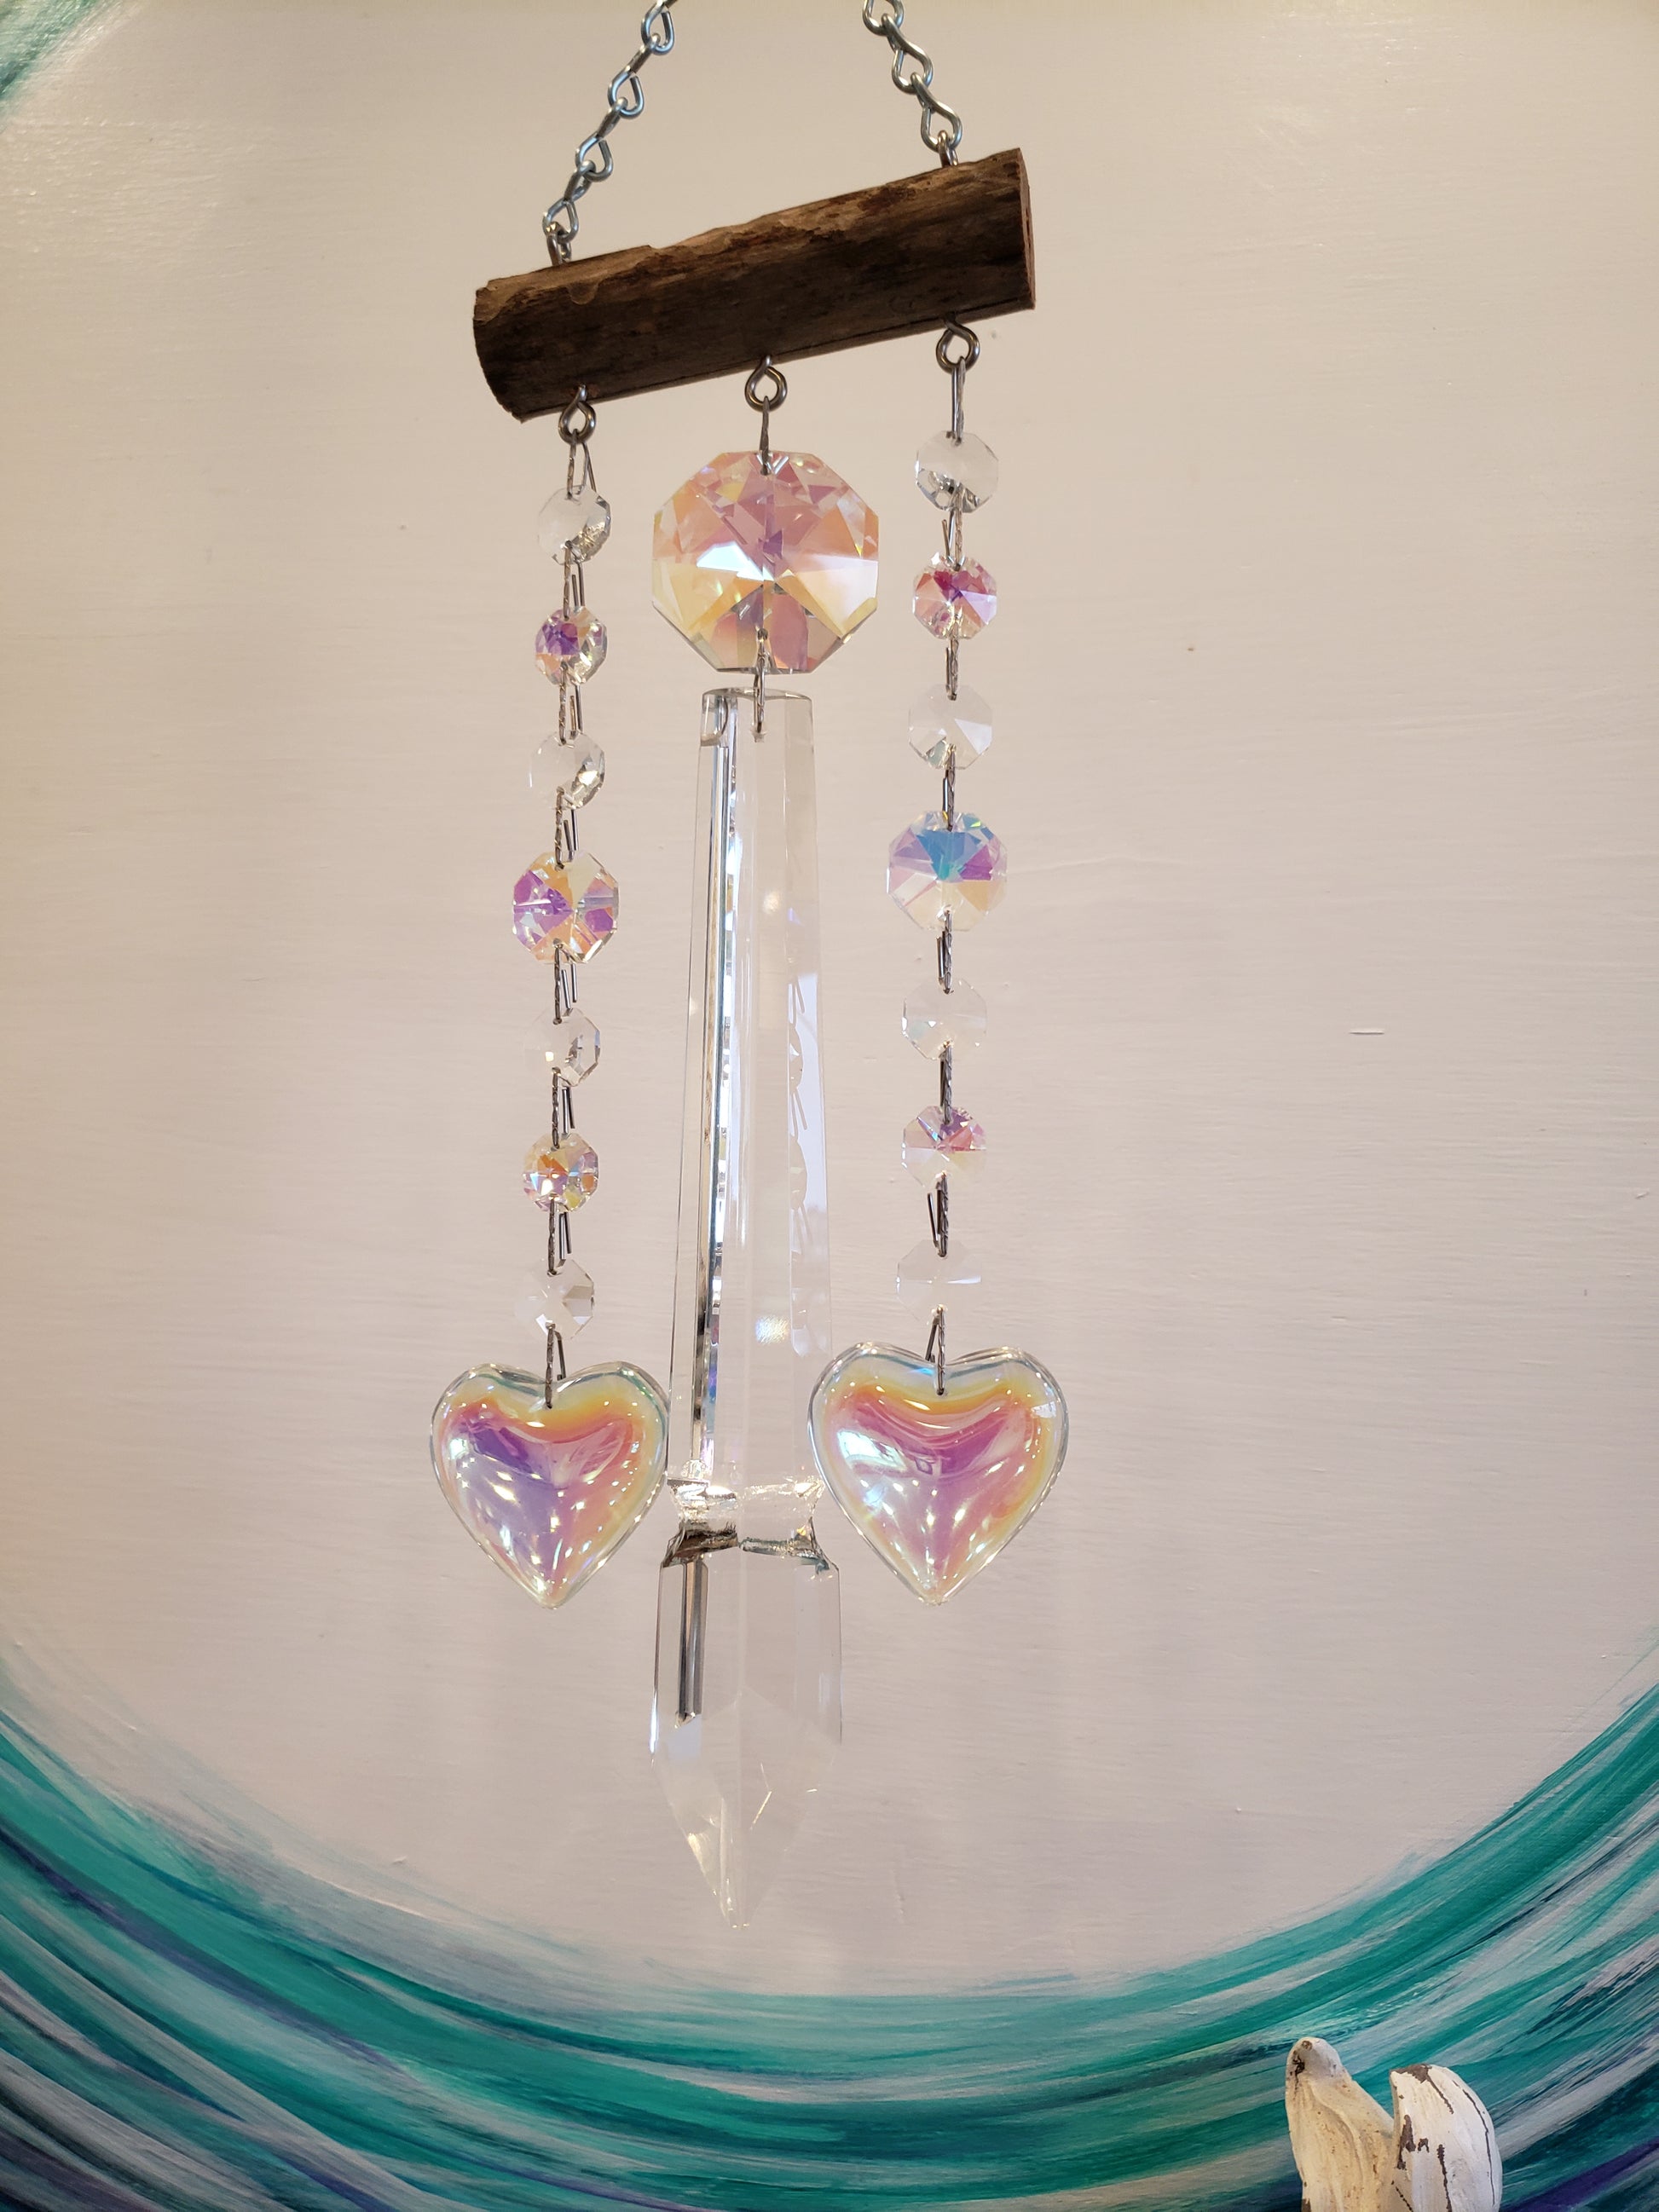 Hand made windchime by Dazzling Driftwood